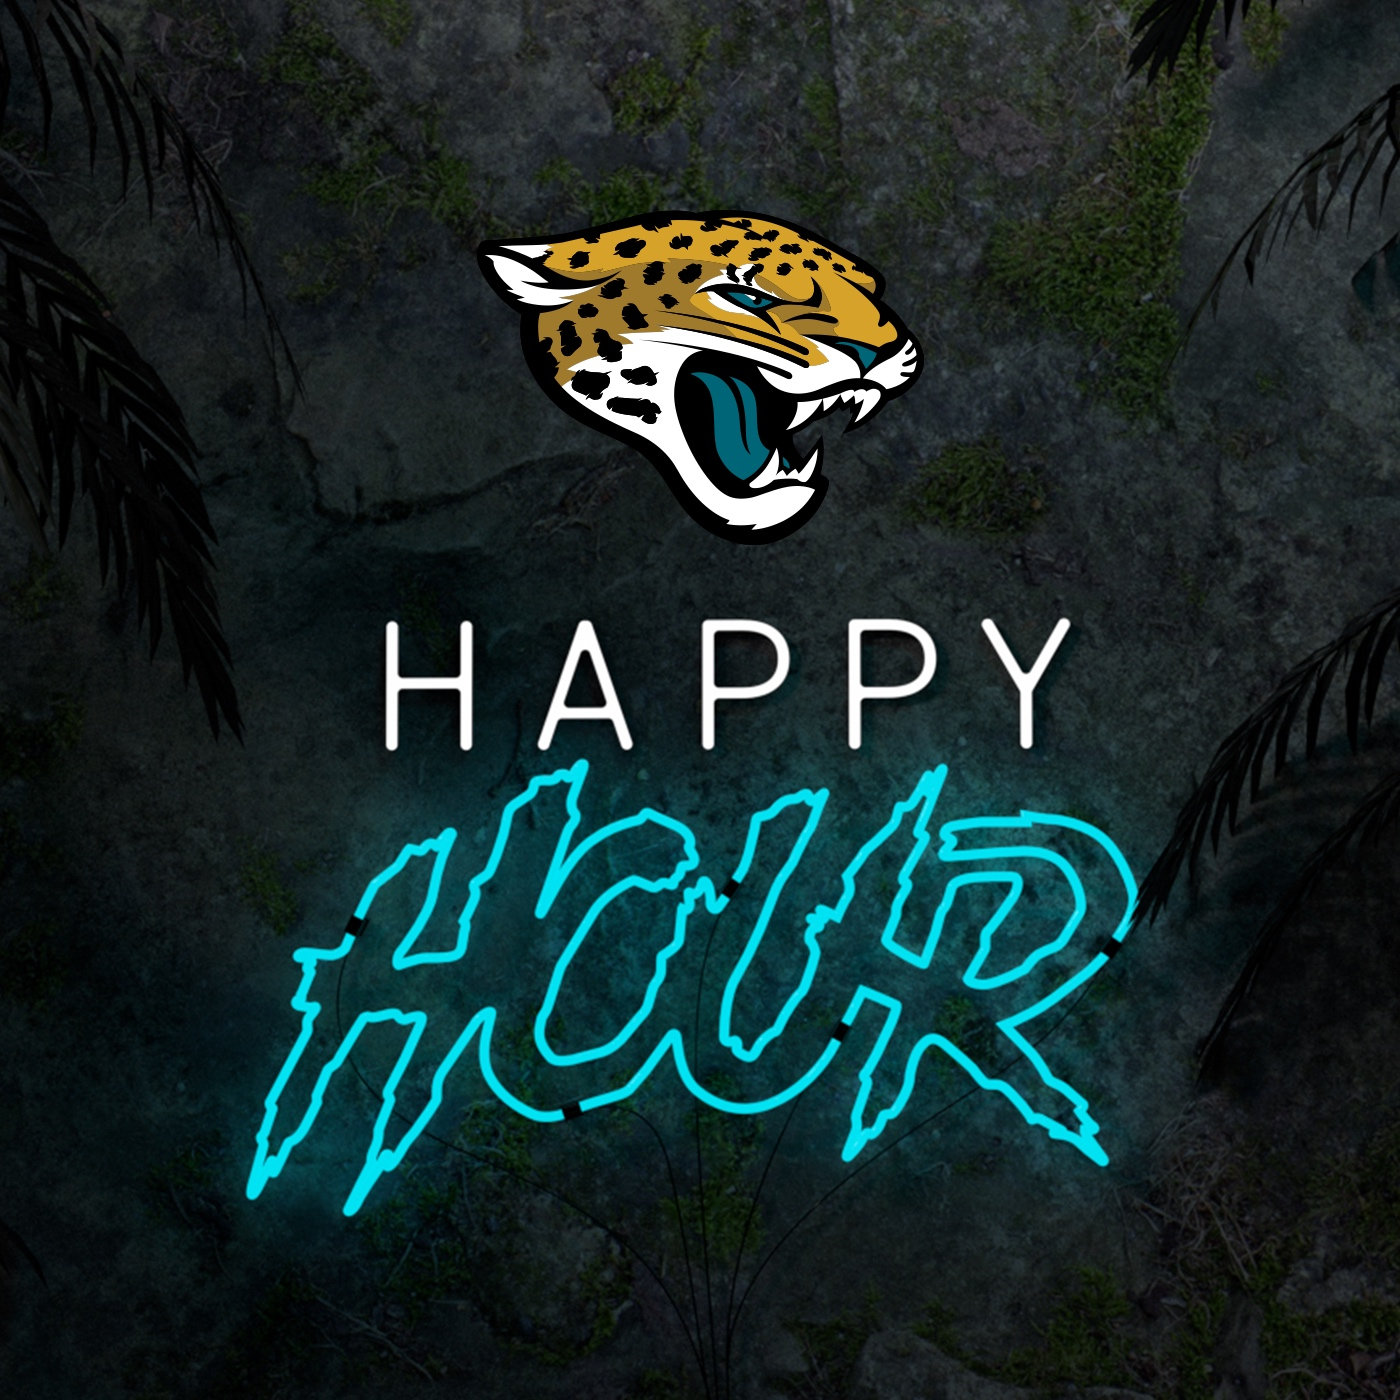 Biggest takeaways from Eagles loss | Jaguars Happy Hour: Monday, October 3